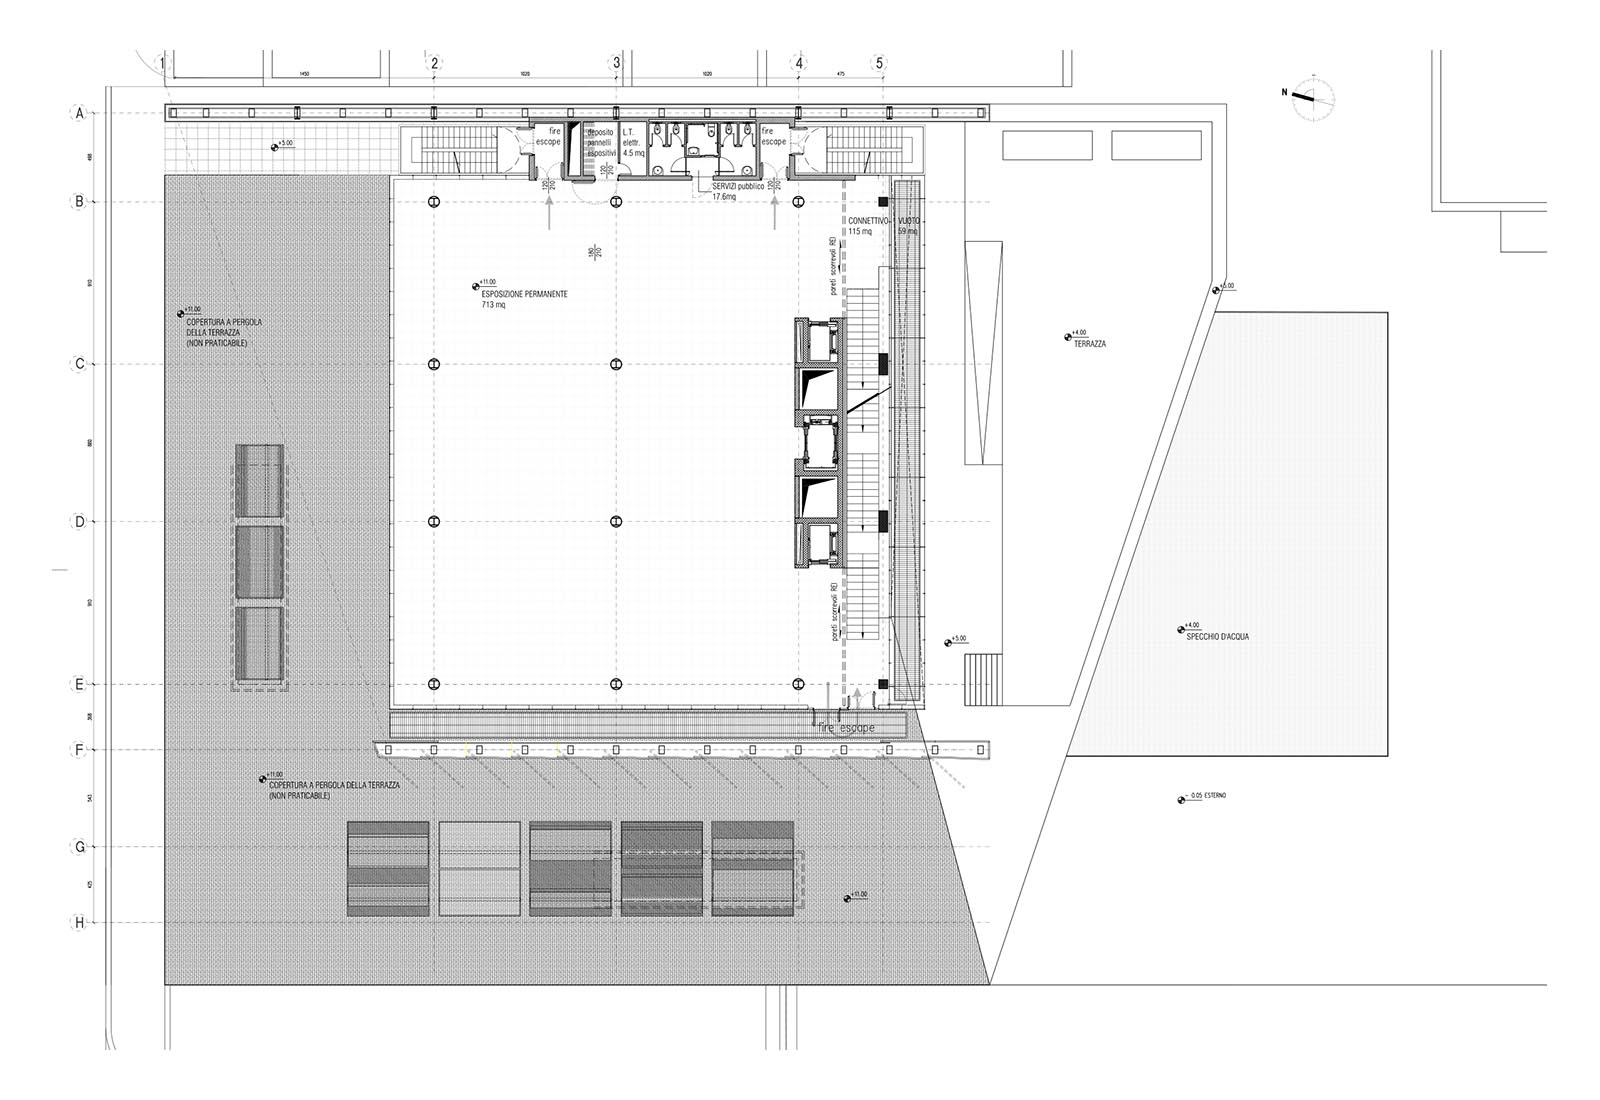 Science and technology museum in Rome - Typological floor plan